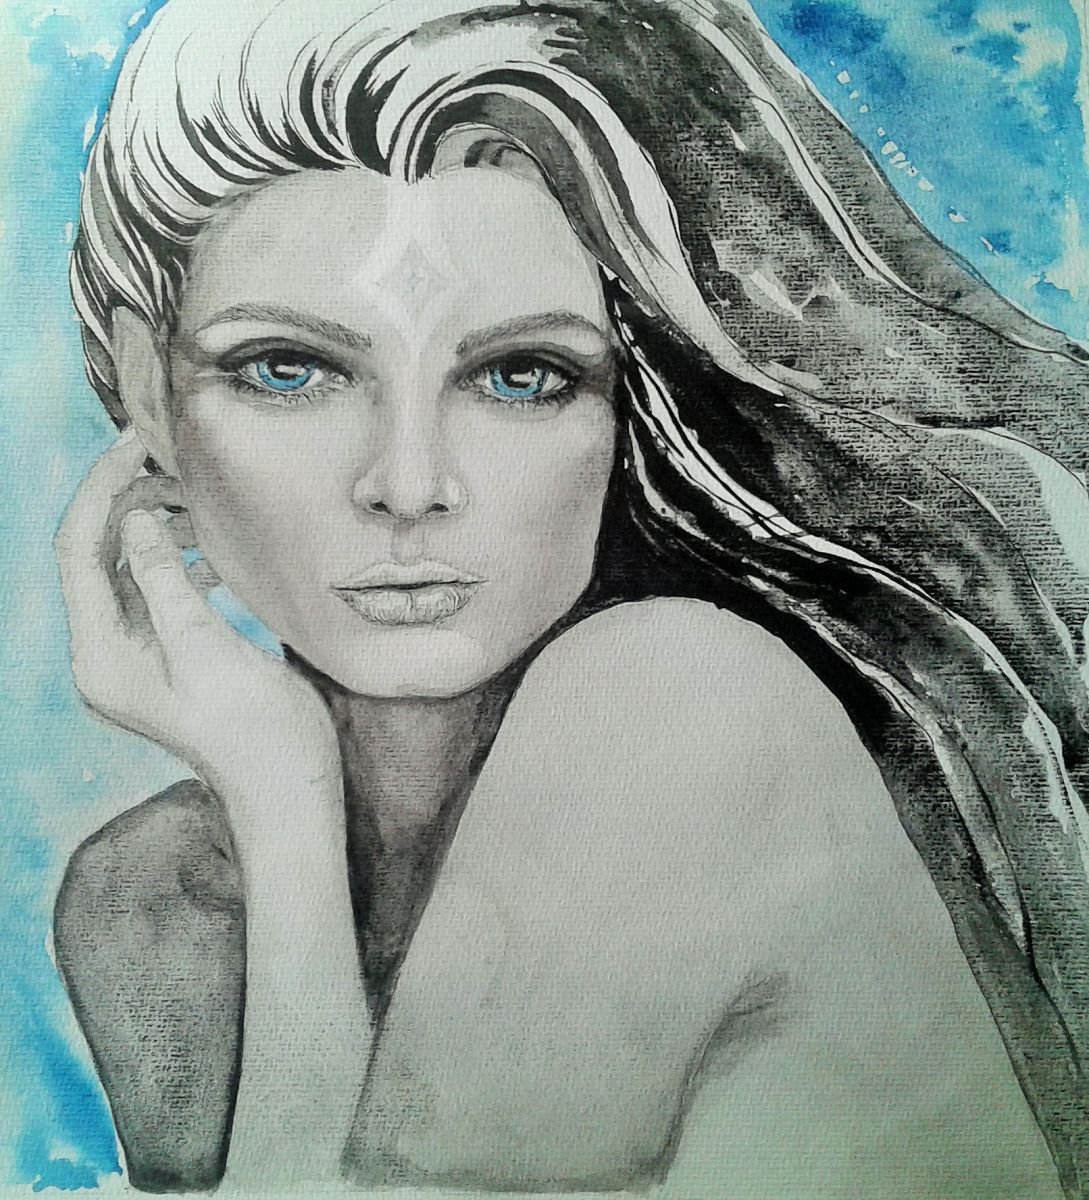 Love in blue by Ninni watercolors